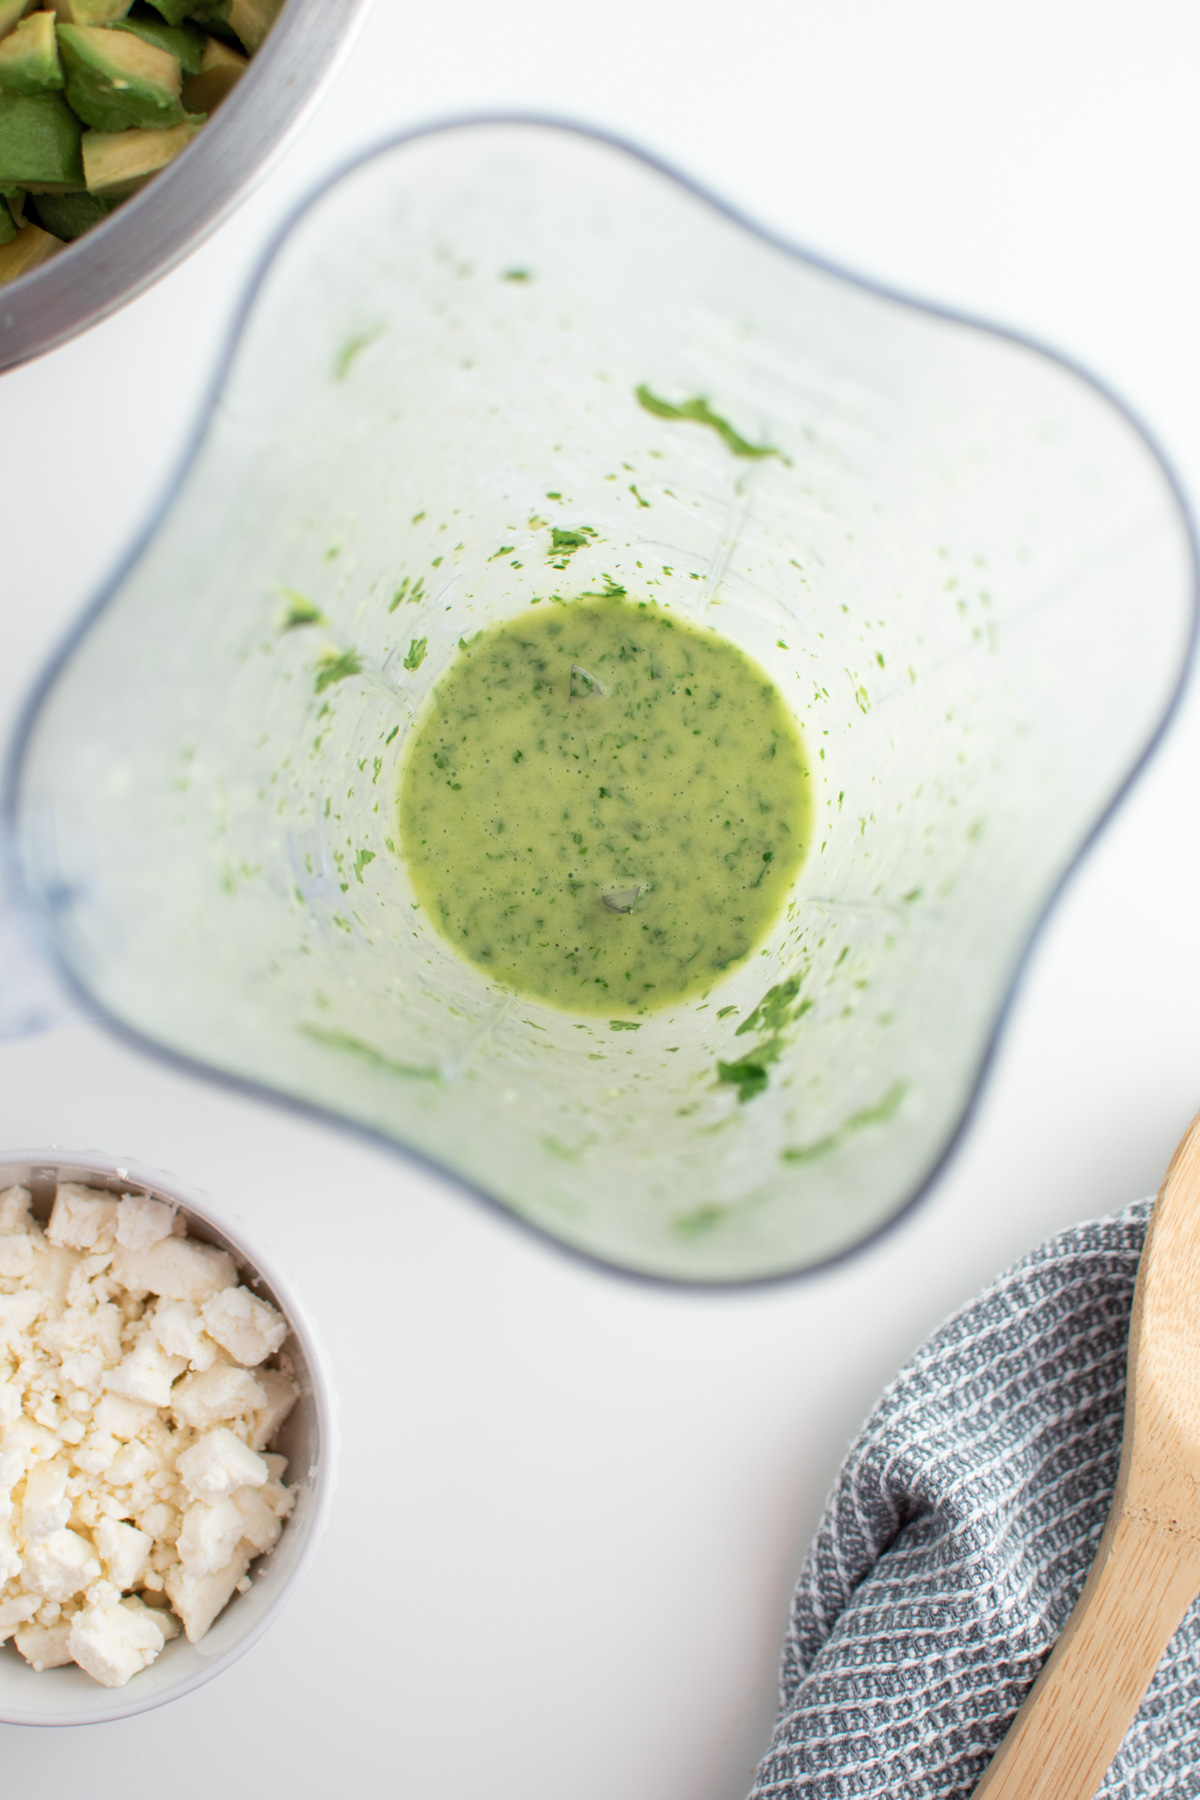 Cilantro lime dressing in blender next to bowl of feta and blue kitchen towel.